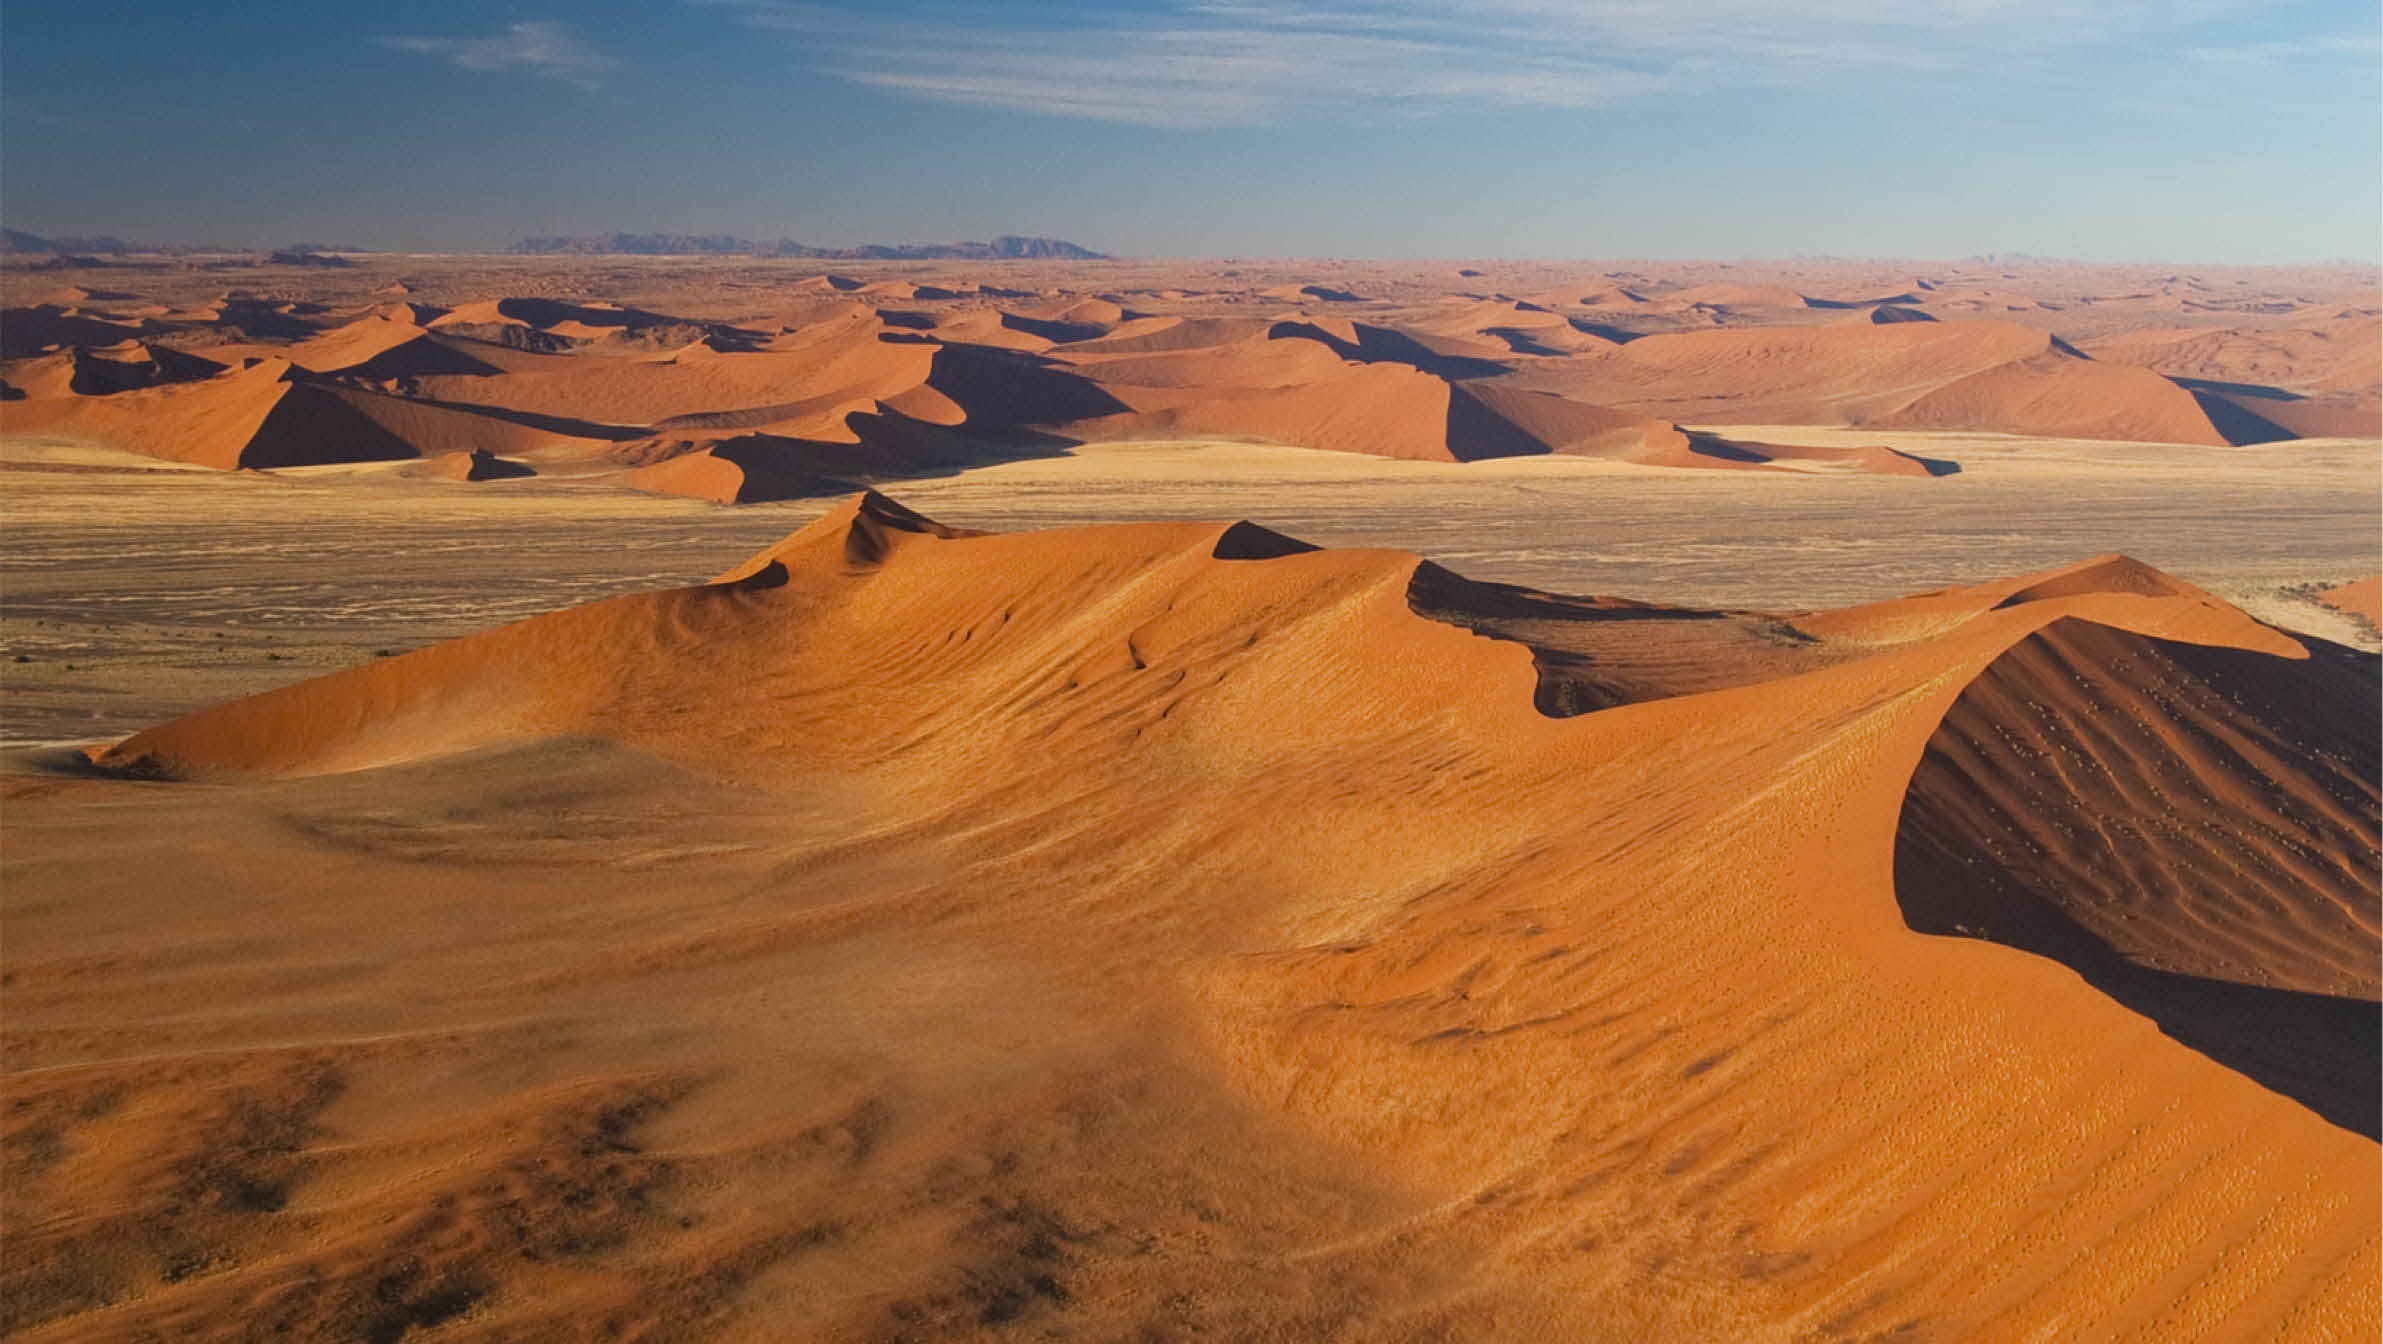 Dunes from Namib desert, Namibia. View from plane.